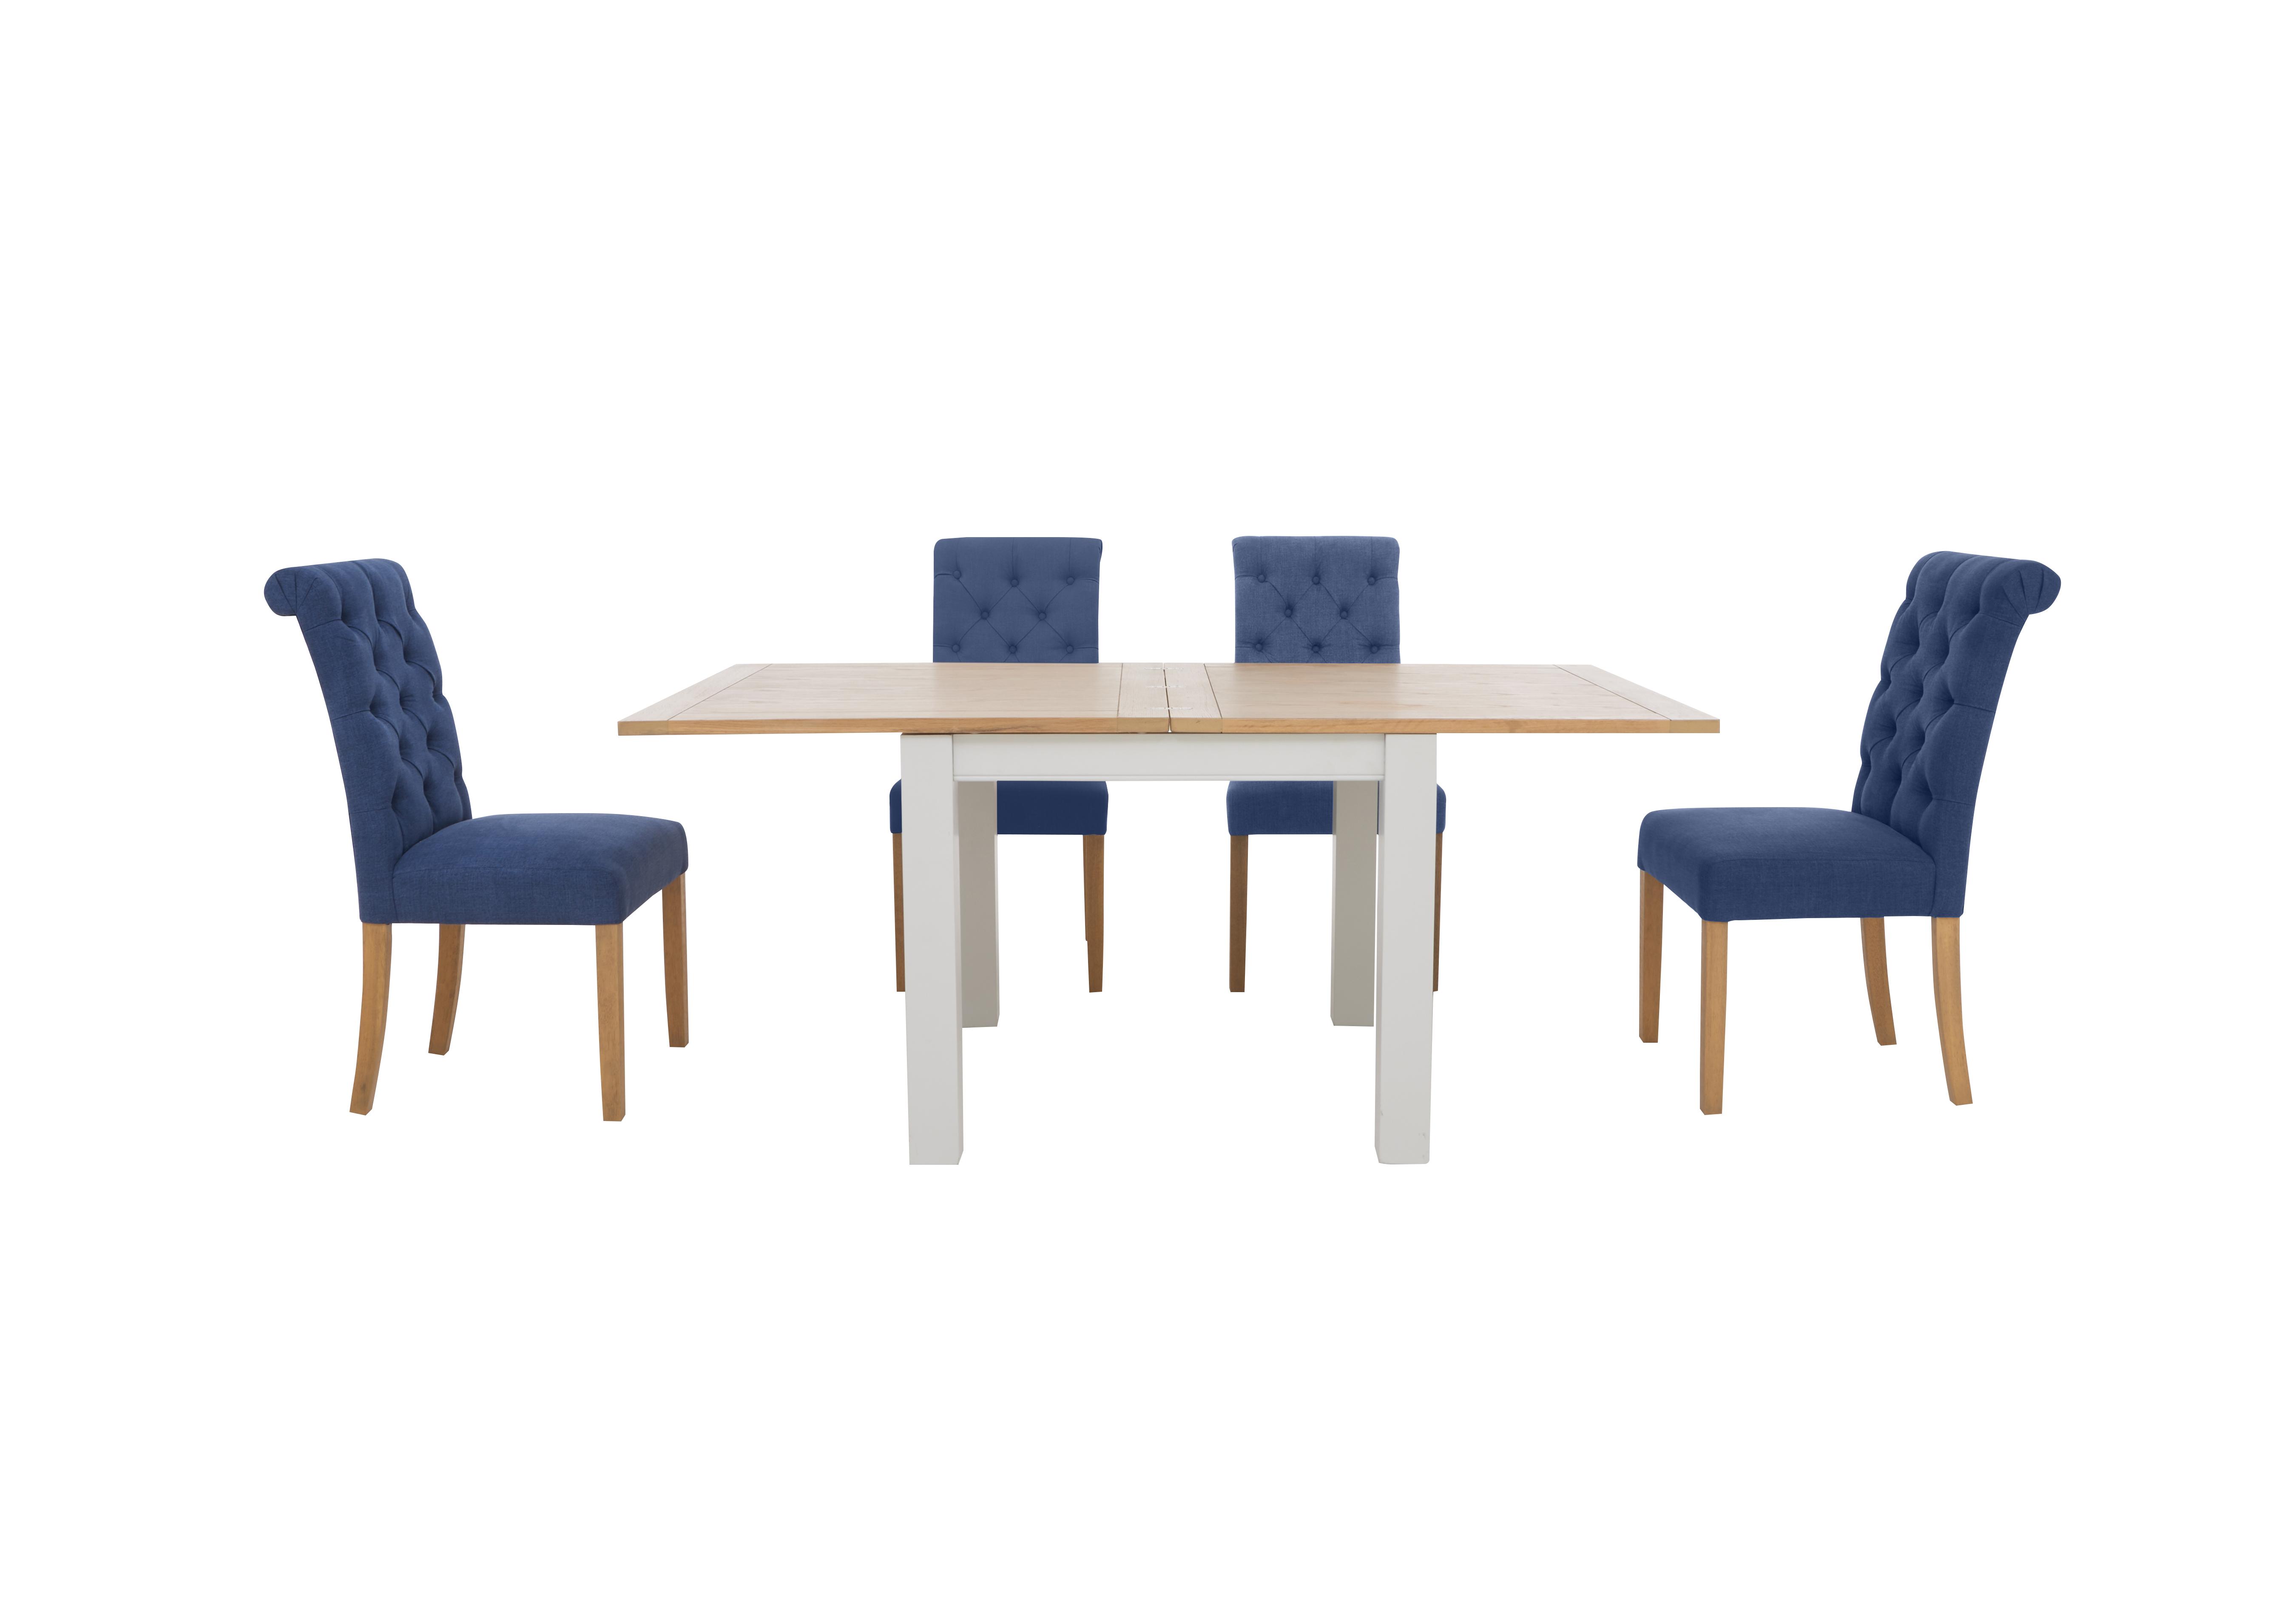 Hamilton Flip Top Dining Table and 4 Button Back Dining Chairs in Denim on Furniture Village